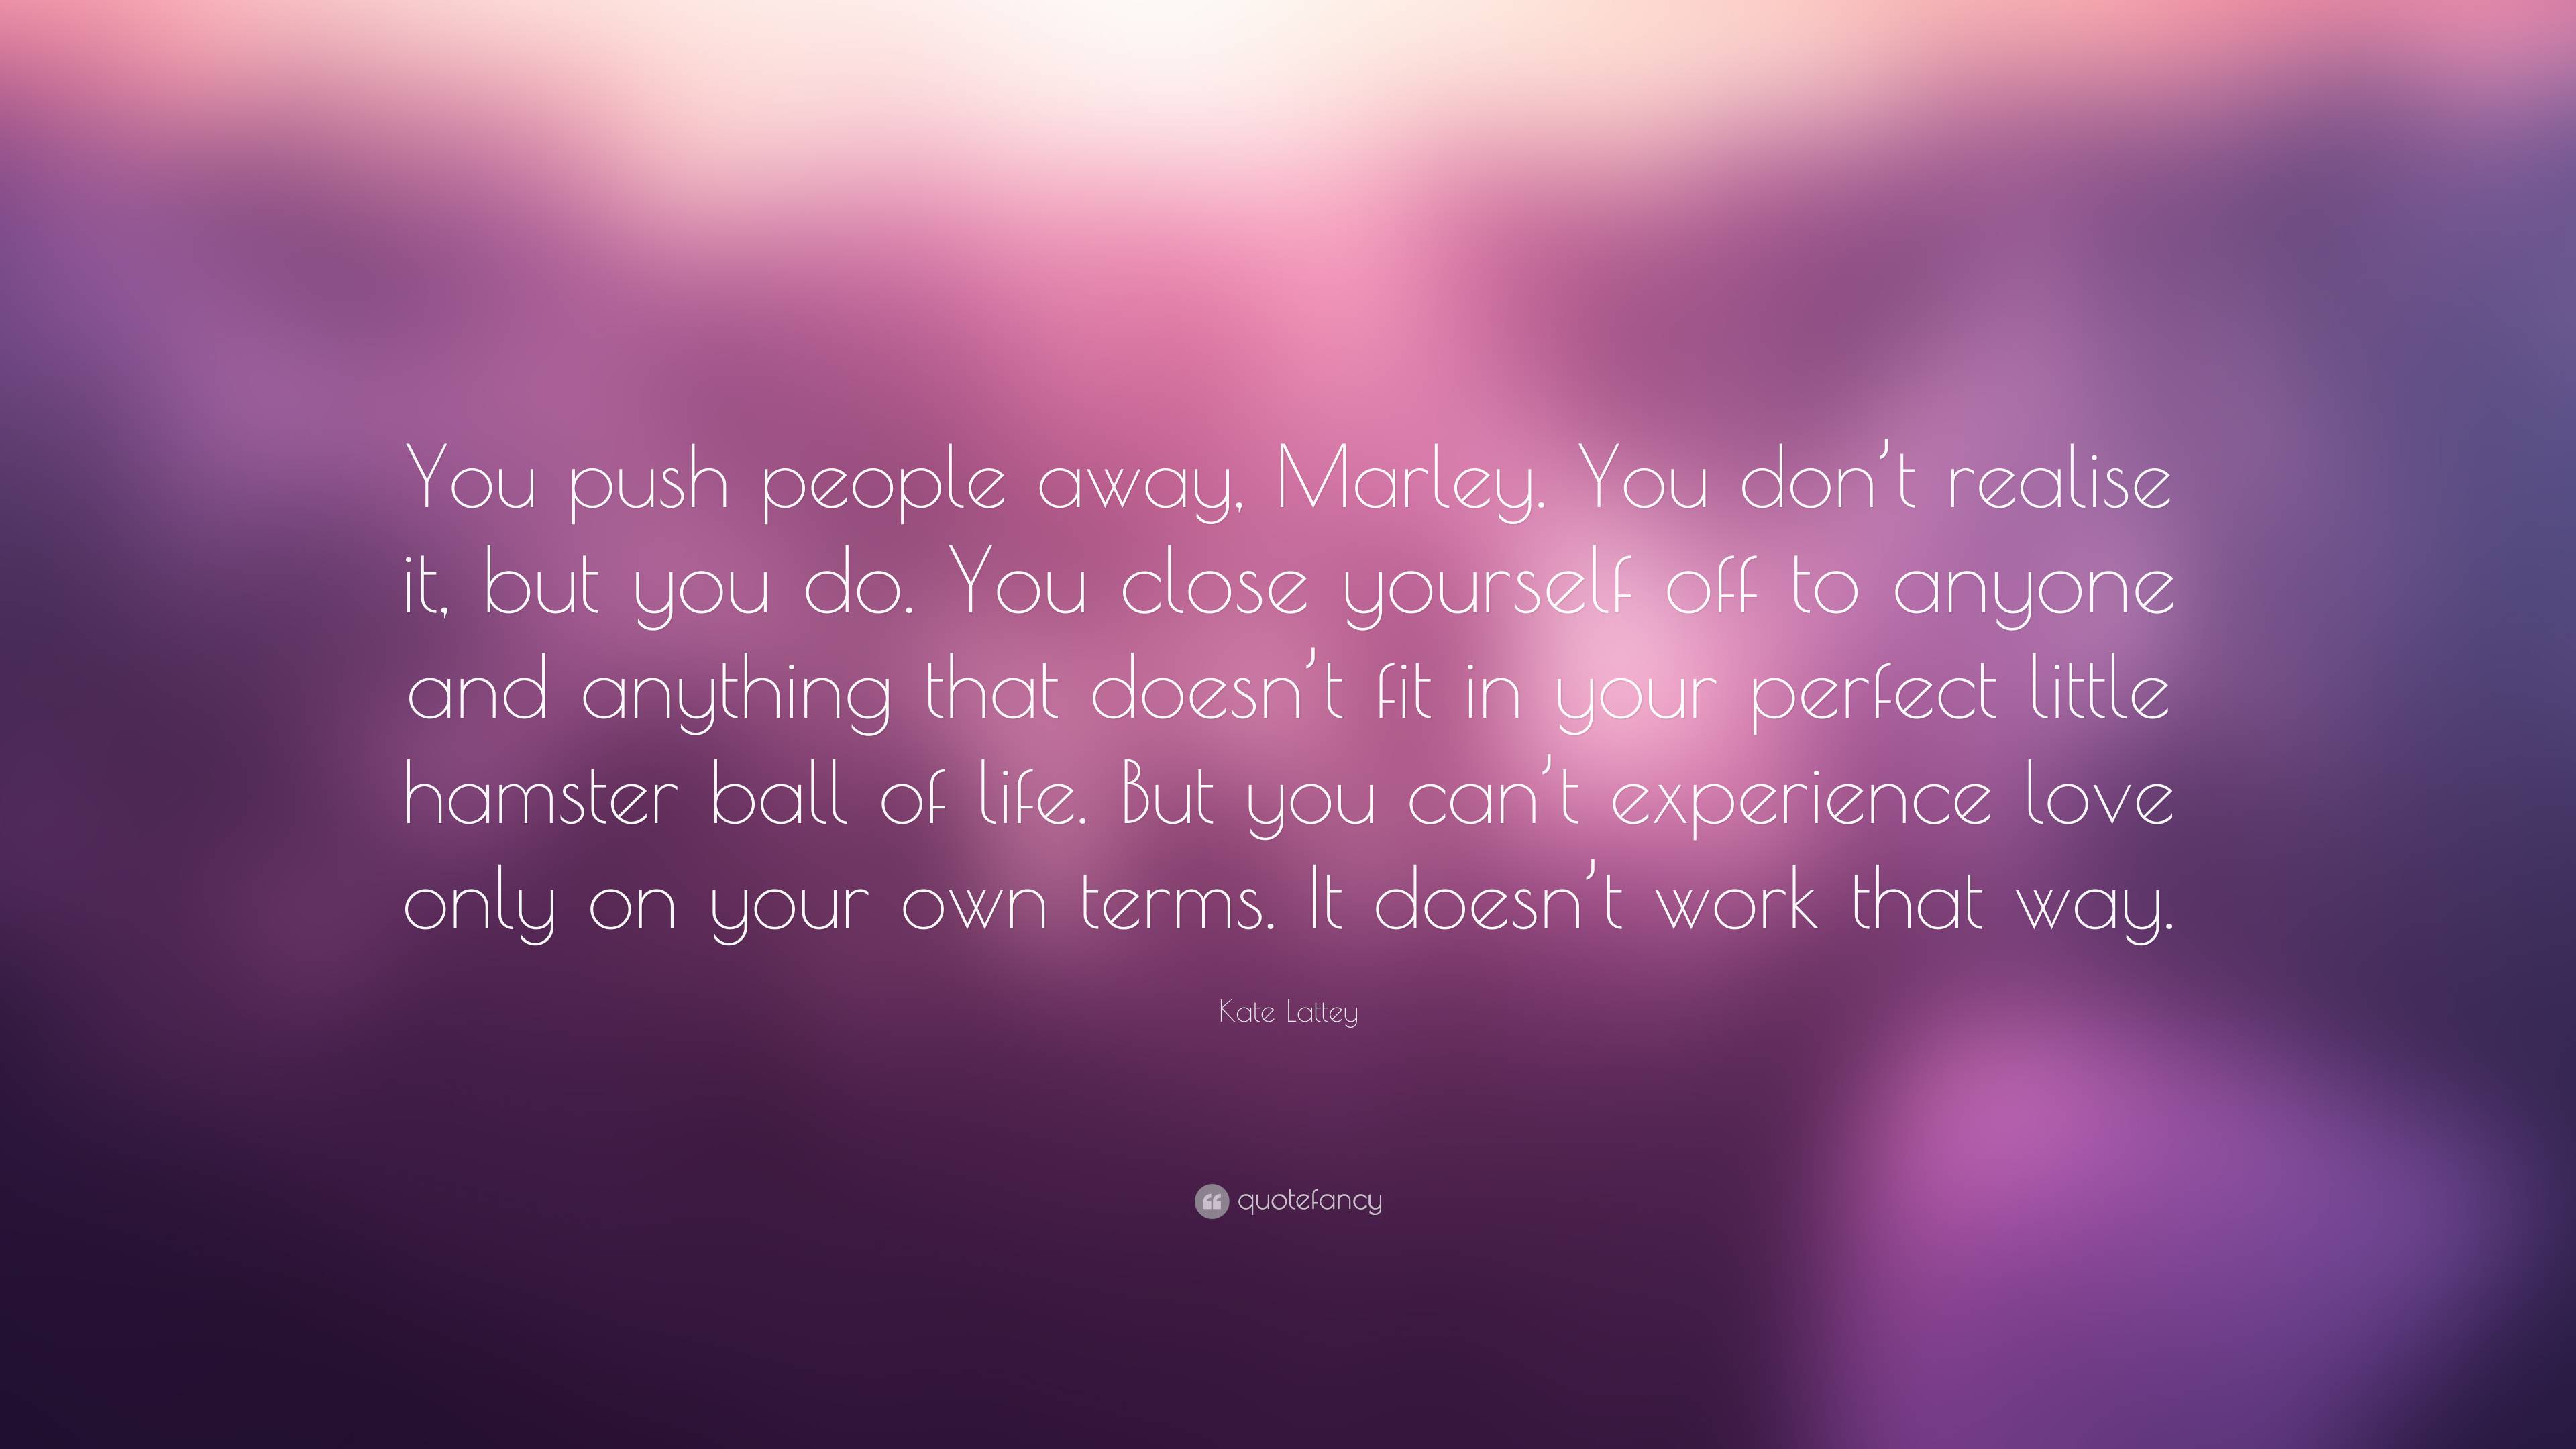 Kate Lattey Quote: “You push people away, Marley. You don’t realise it ...